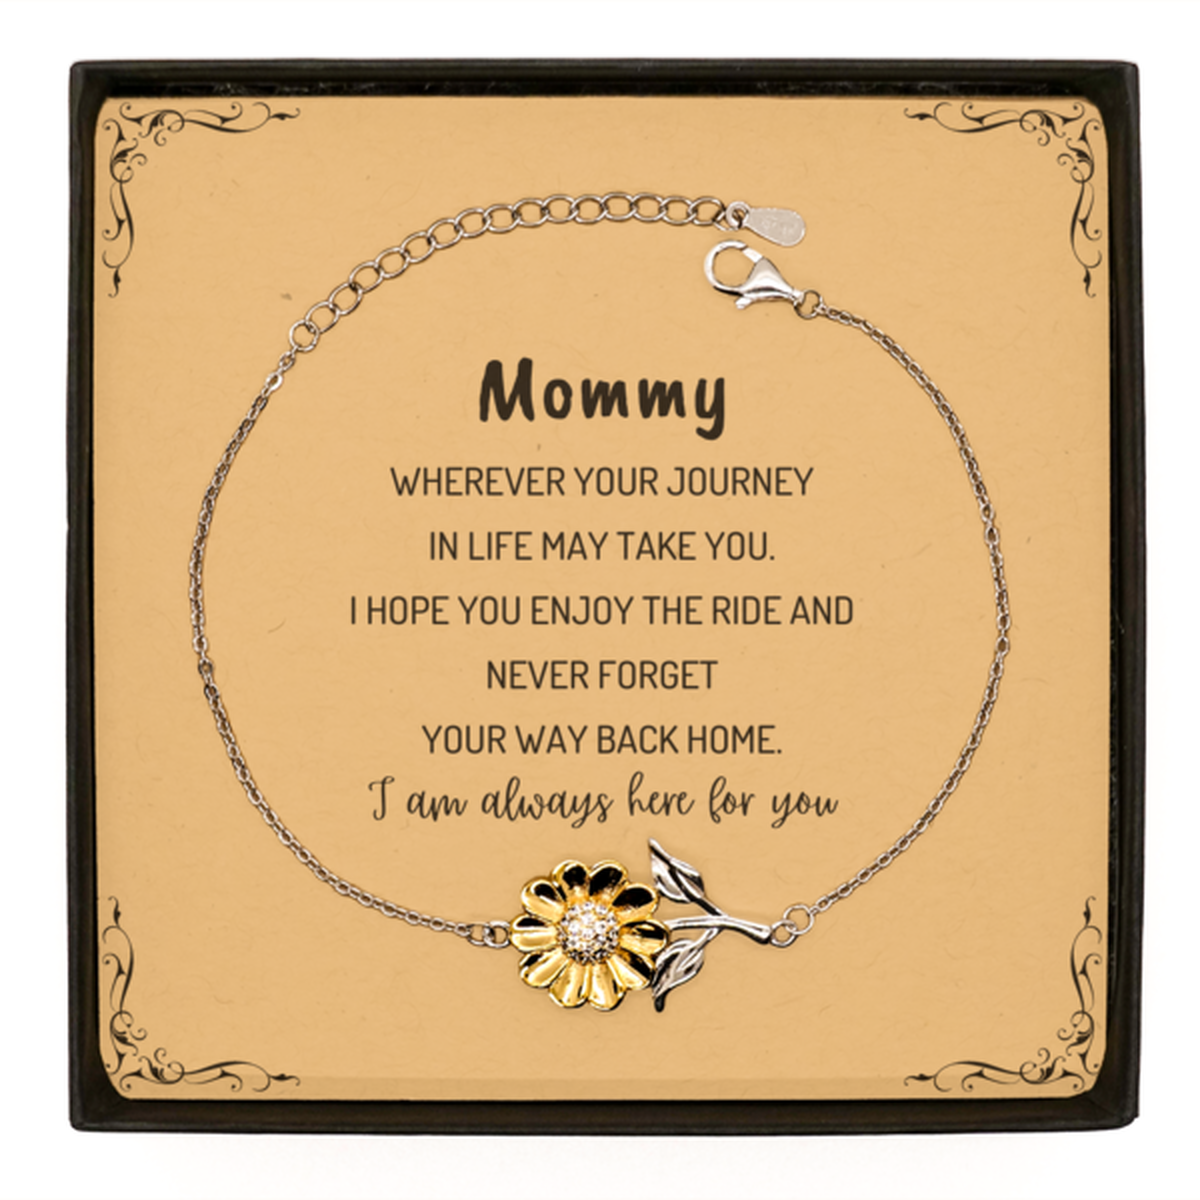 Mommy wherever your journey in life may take you, I am always here for you Mommy Sunflower Bracelet, Awesome Christmas Gifts For Mommy Message Card, Mommy Birthday Gifts for Men Women Family Loved One